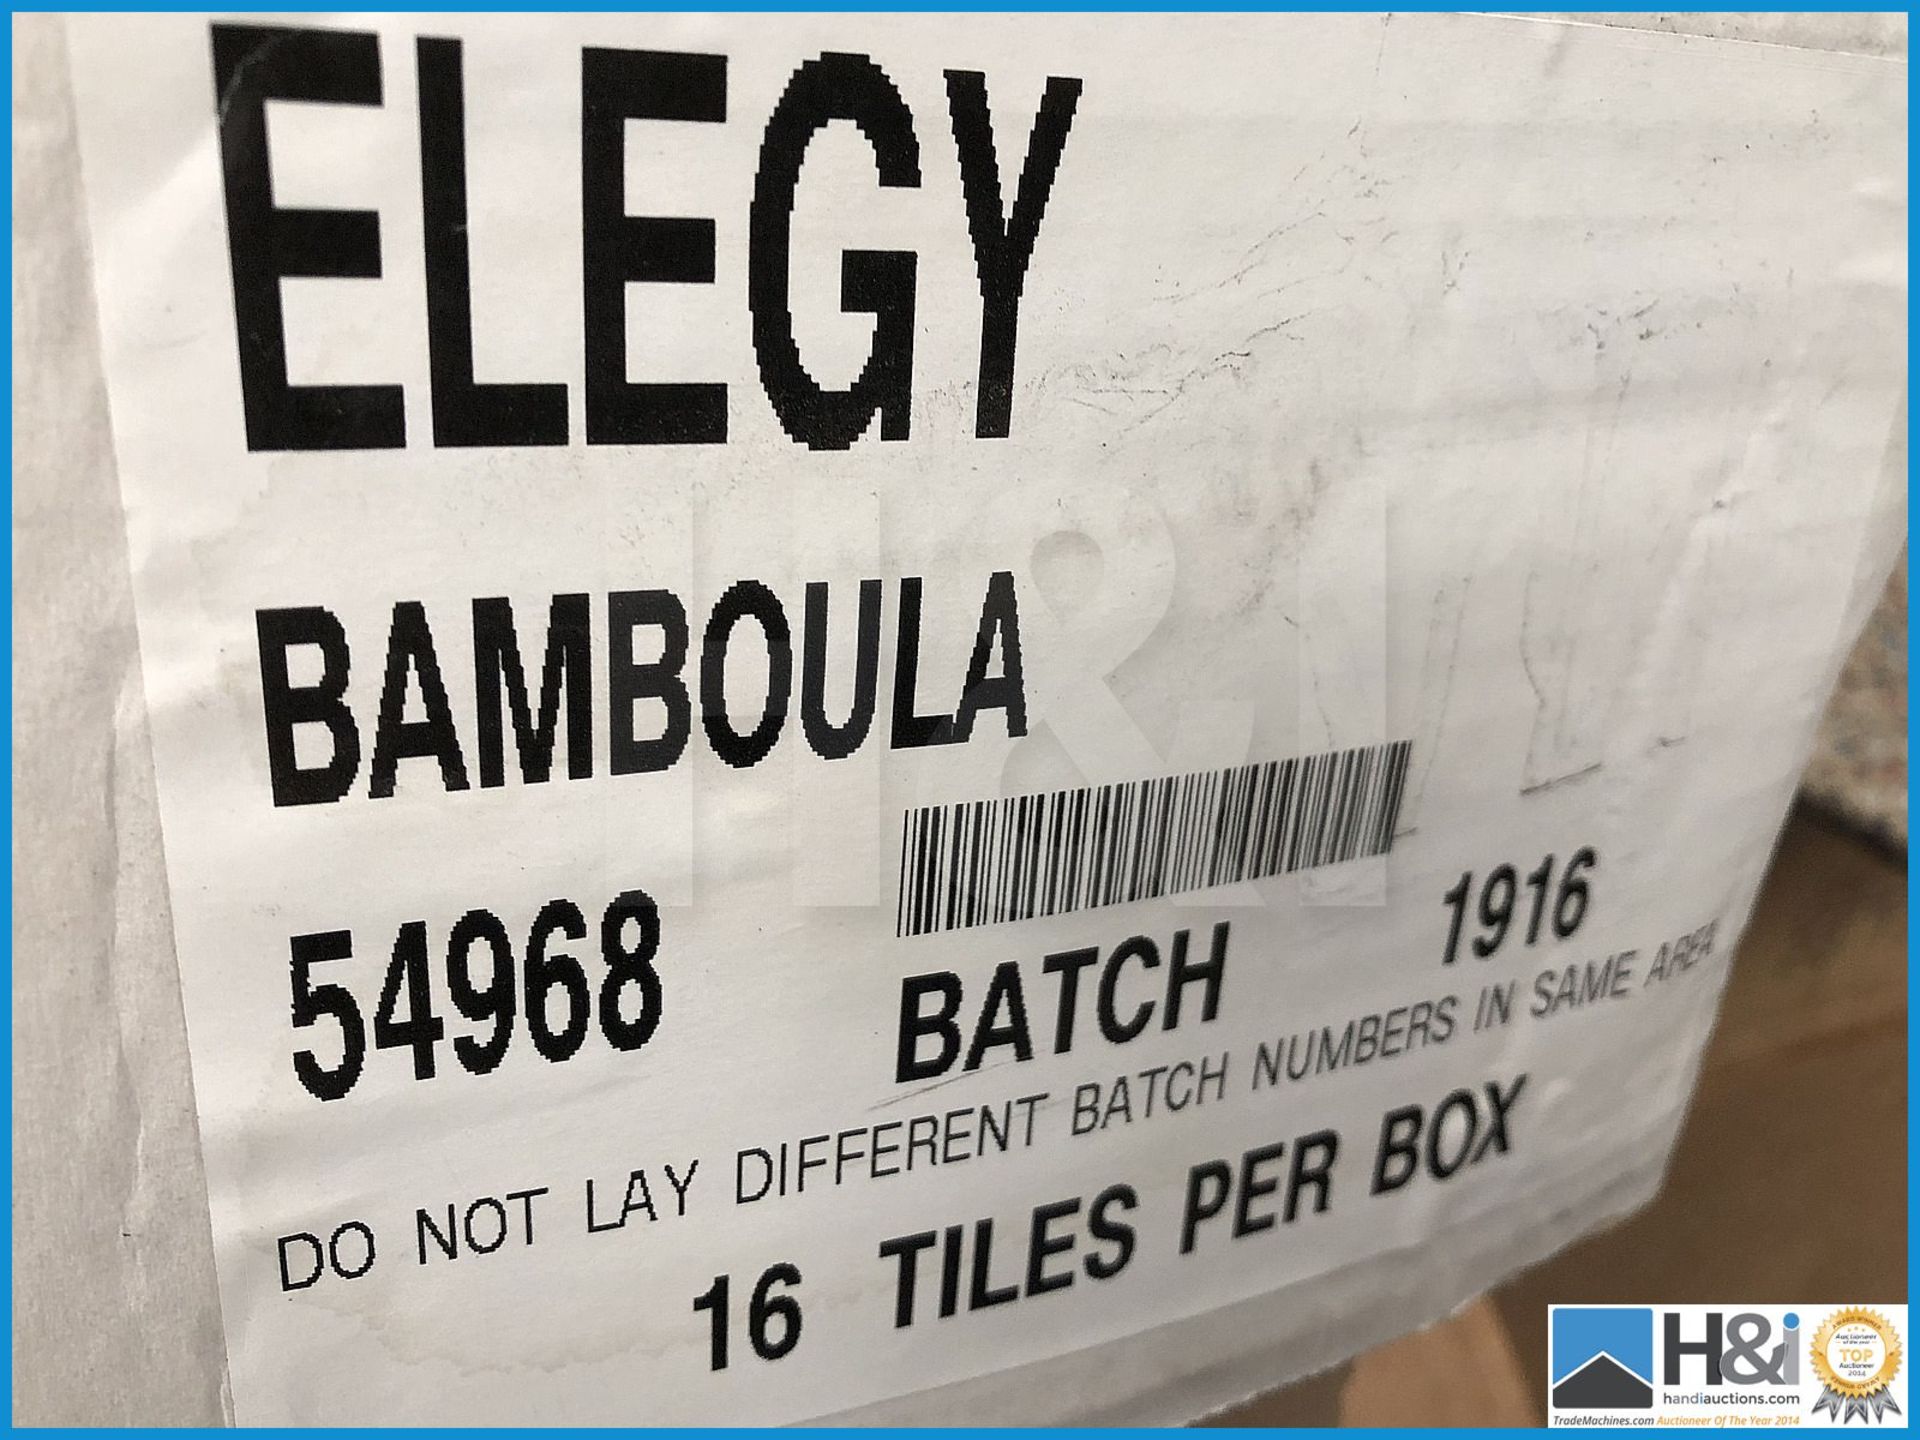 10 boxes of 16 tiles per box. Brand new The Carpet Tile Company Elegy Bamboula. Ultra high quality. - Image 8 of 8